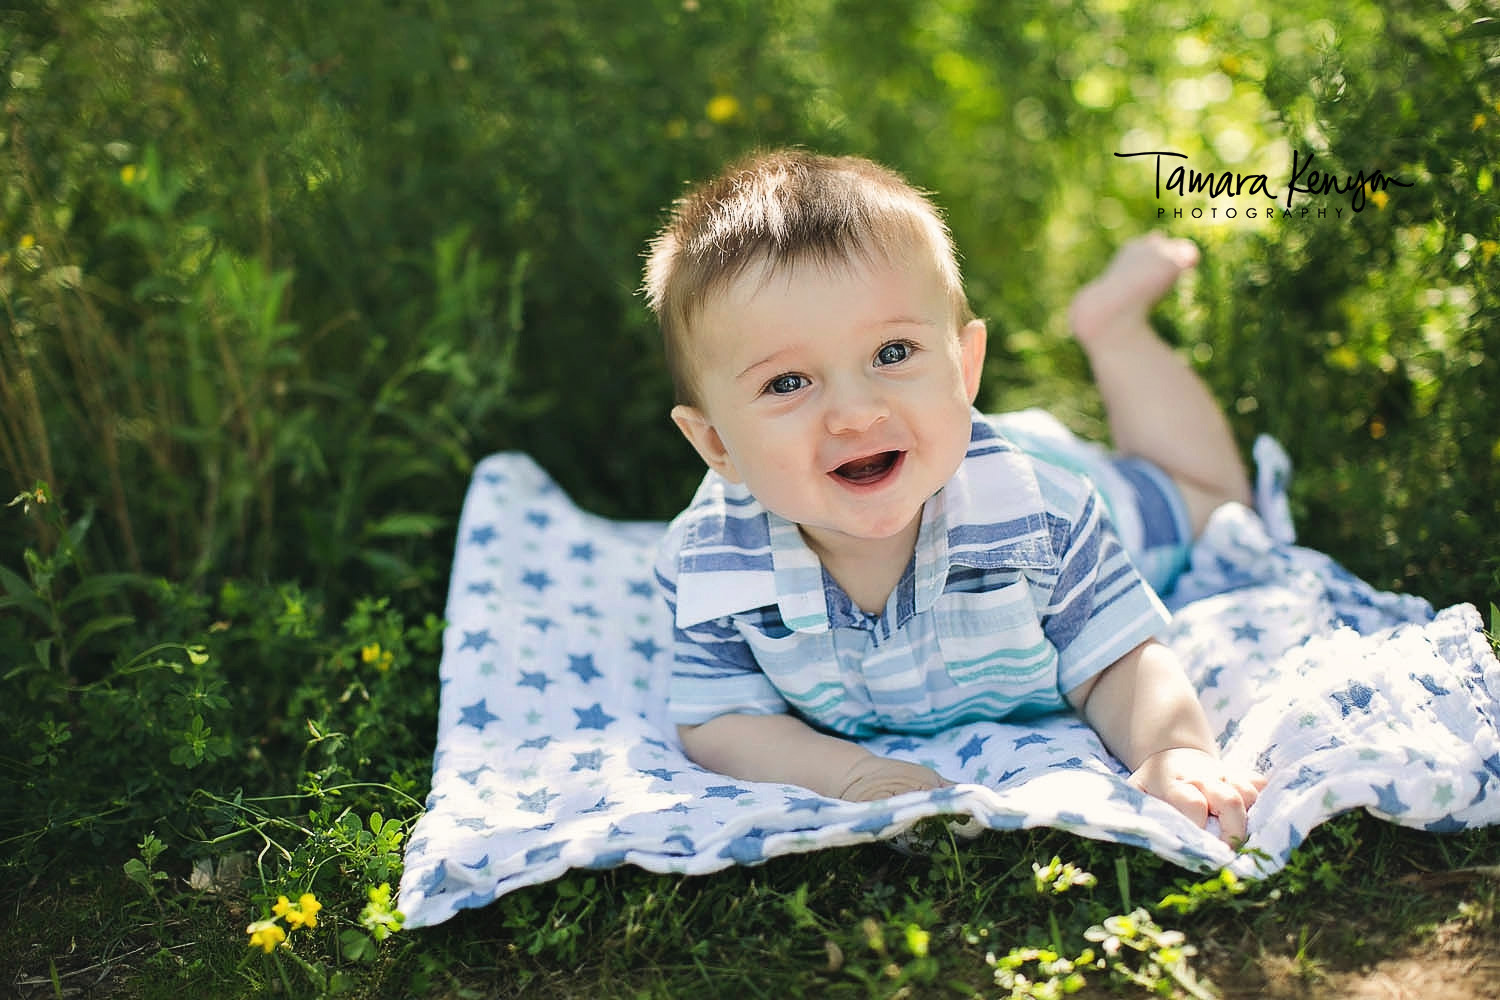 Child photographer in boise